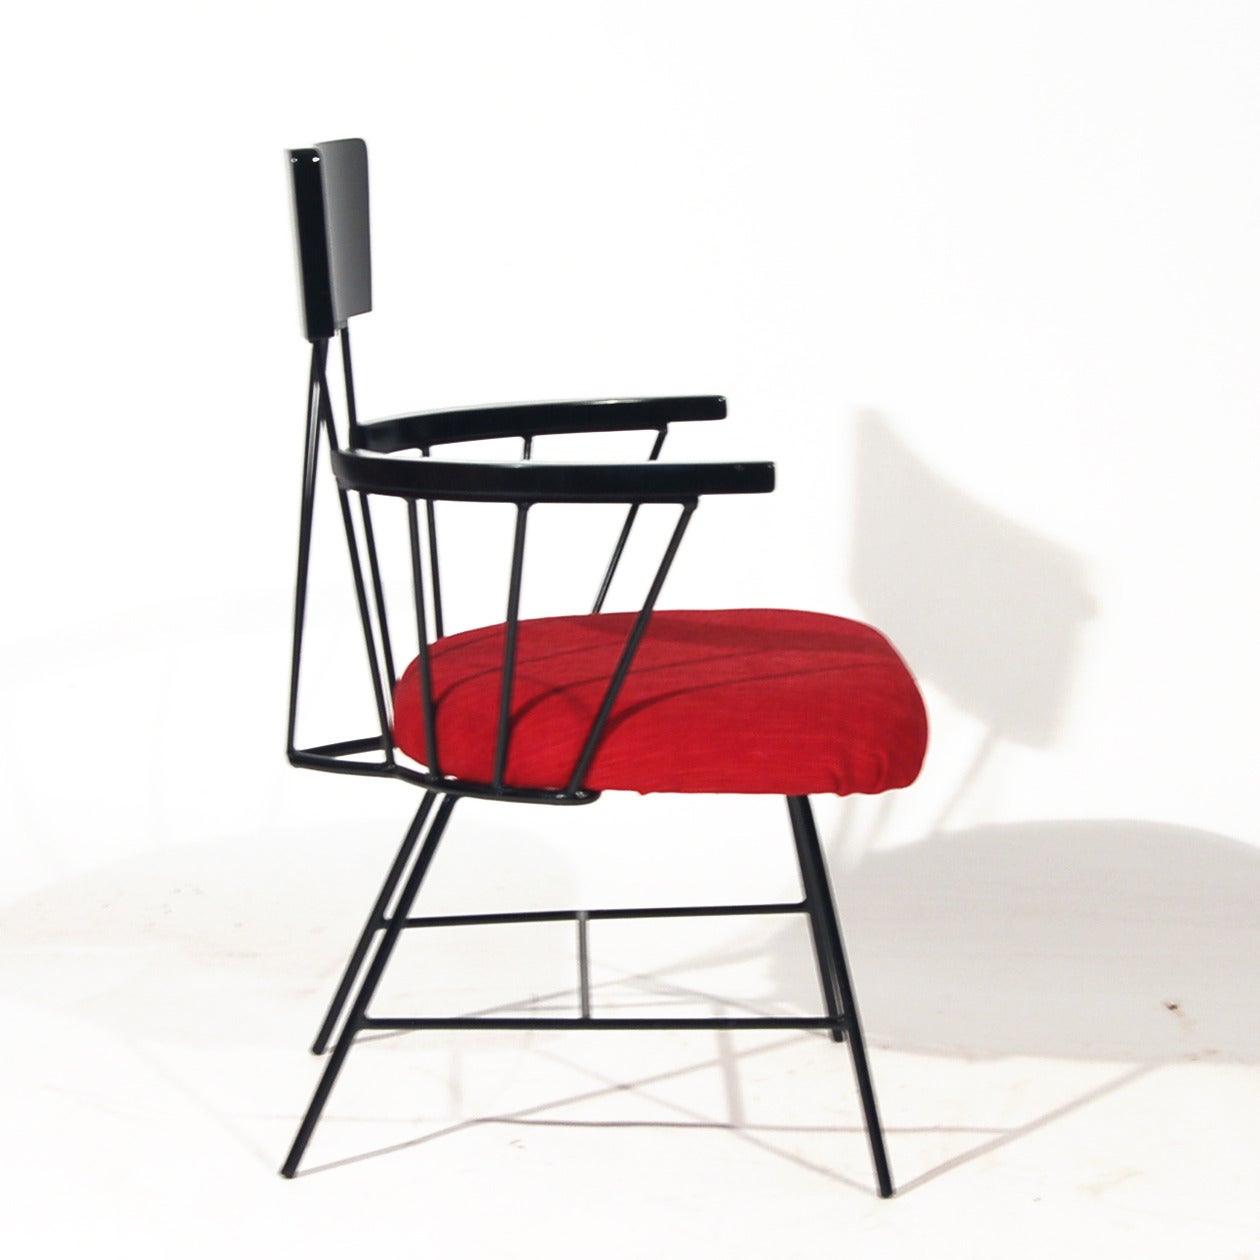 Mid-20th Century Richard McCarthy for Selrite Wrought Iron Chairs For Sale